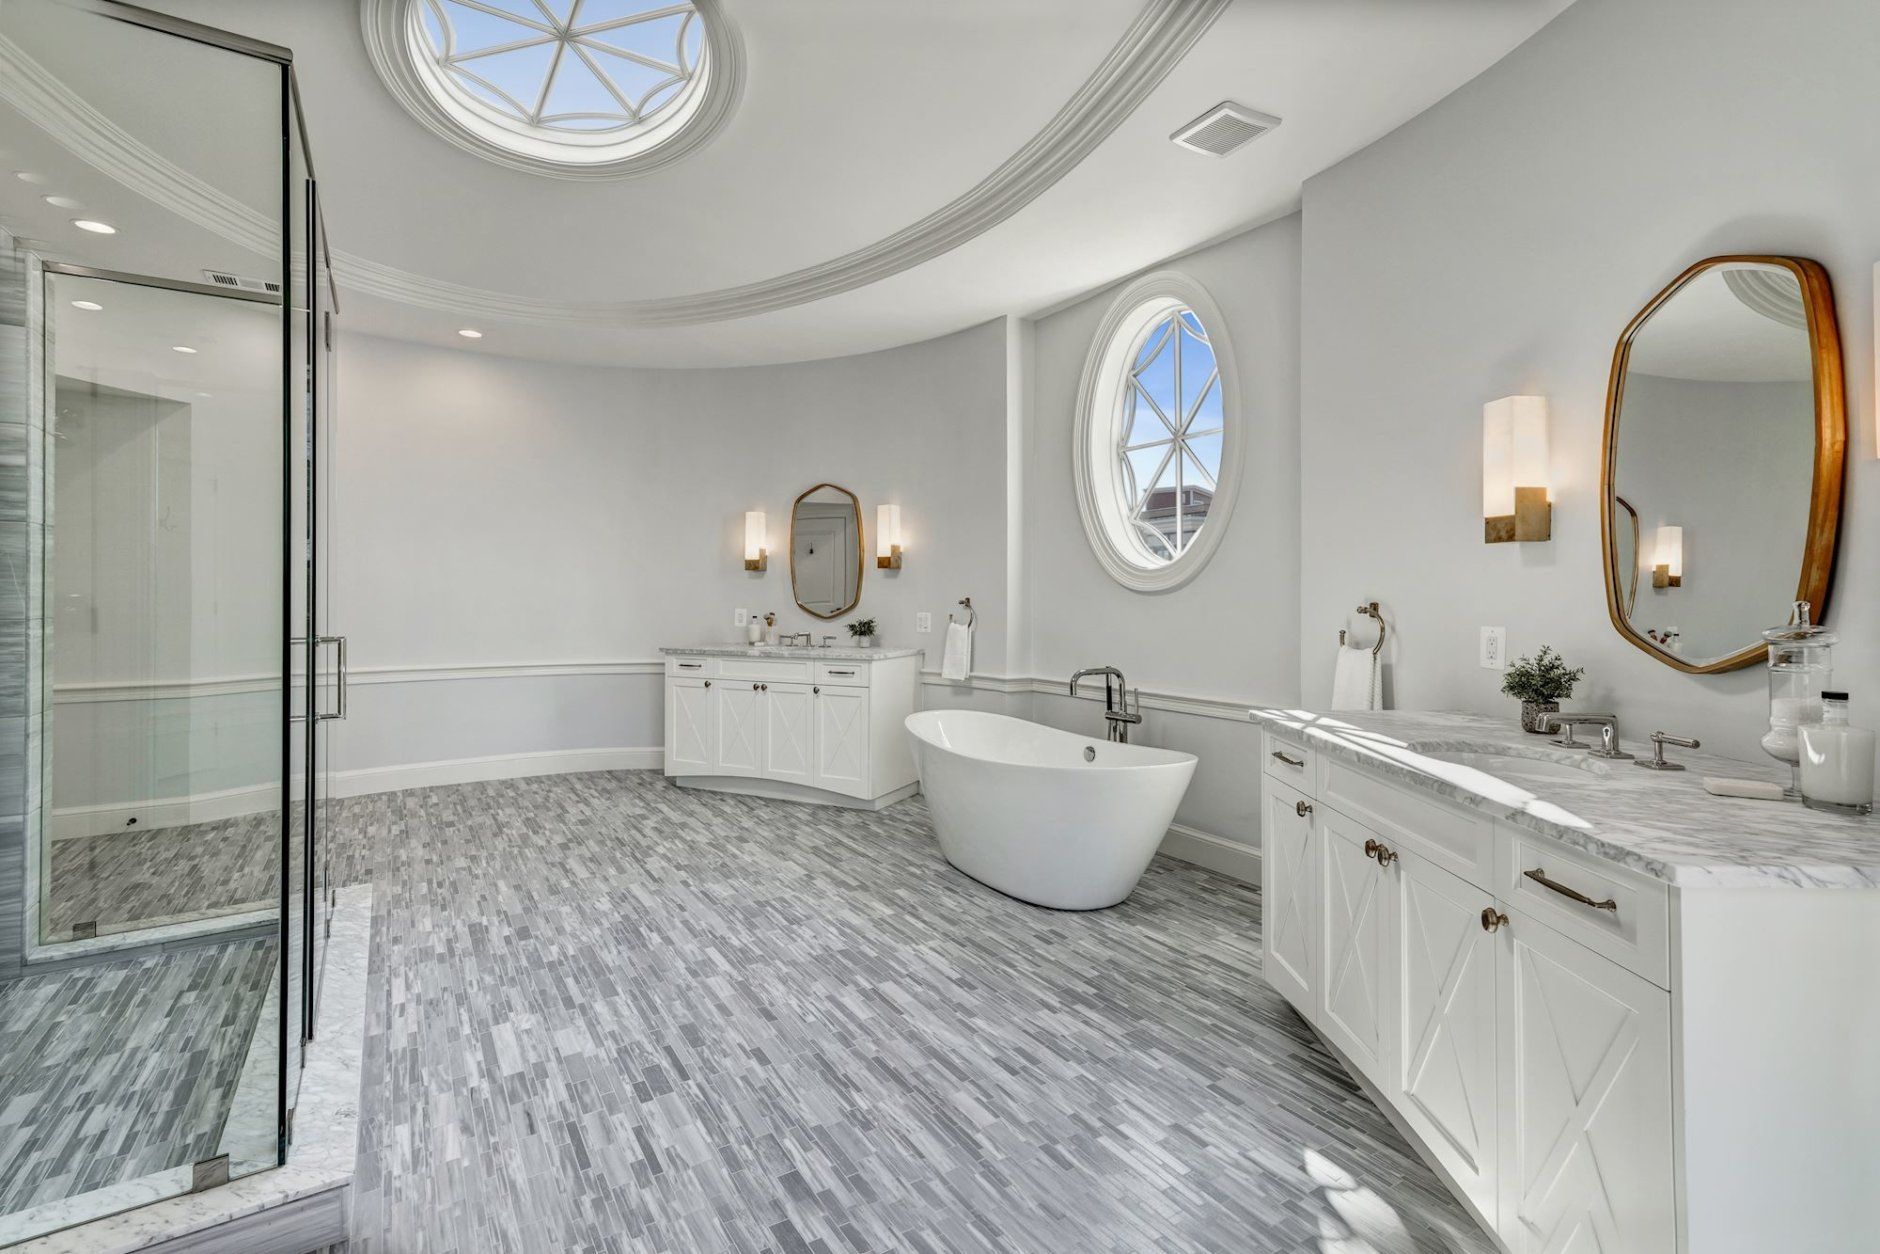 The master bathroom. (Courtesy Wydler Brothers)